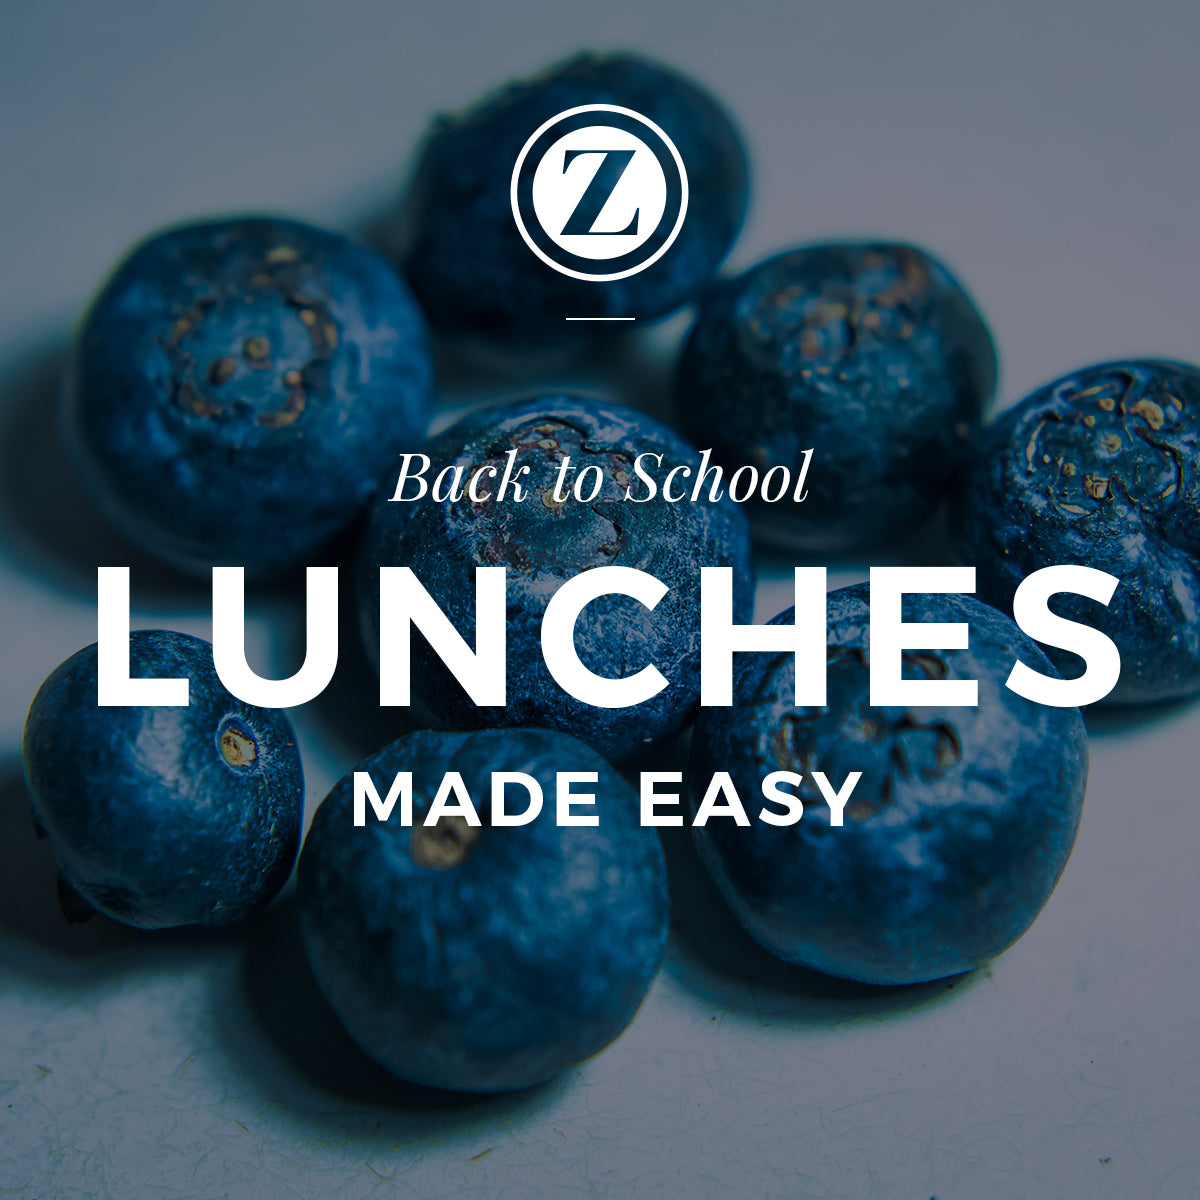 Back to School: Lunches Made Easy